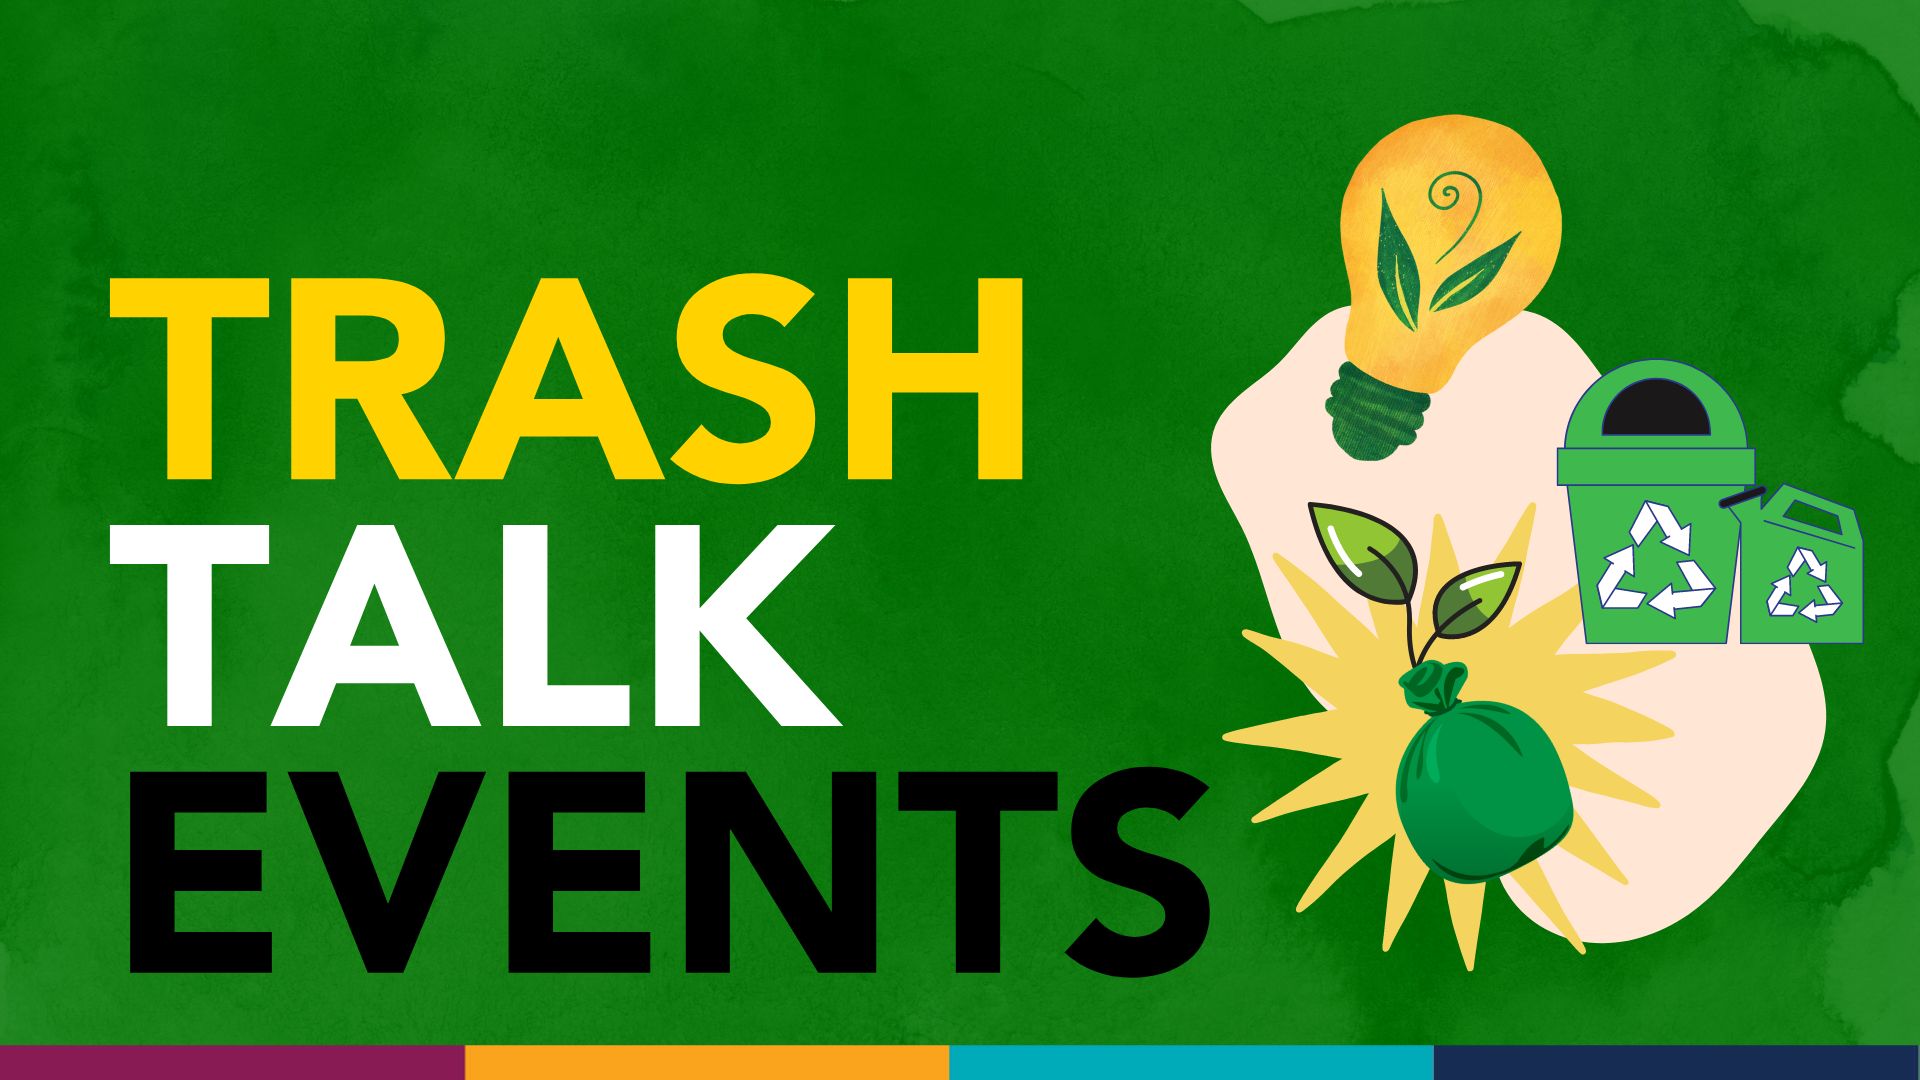 Trash Talk Events | Laura, Lakeland and Cooktown 